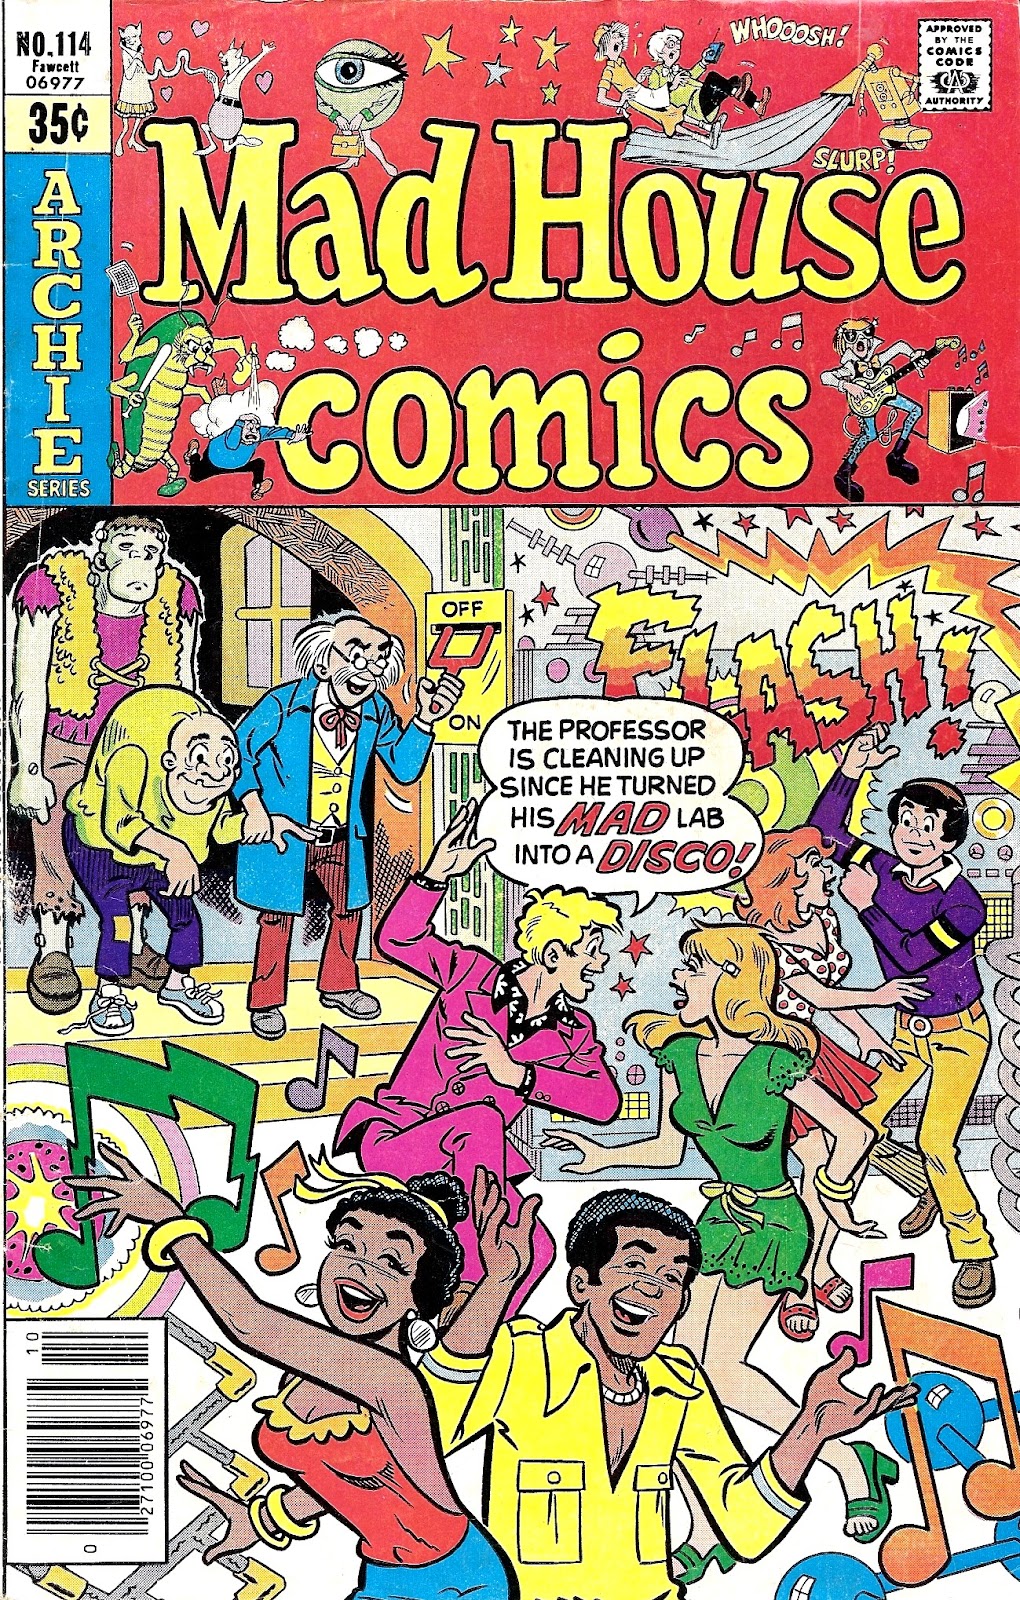 Read online Madhouse Comics comic -  Issue #114 - 1